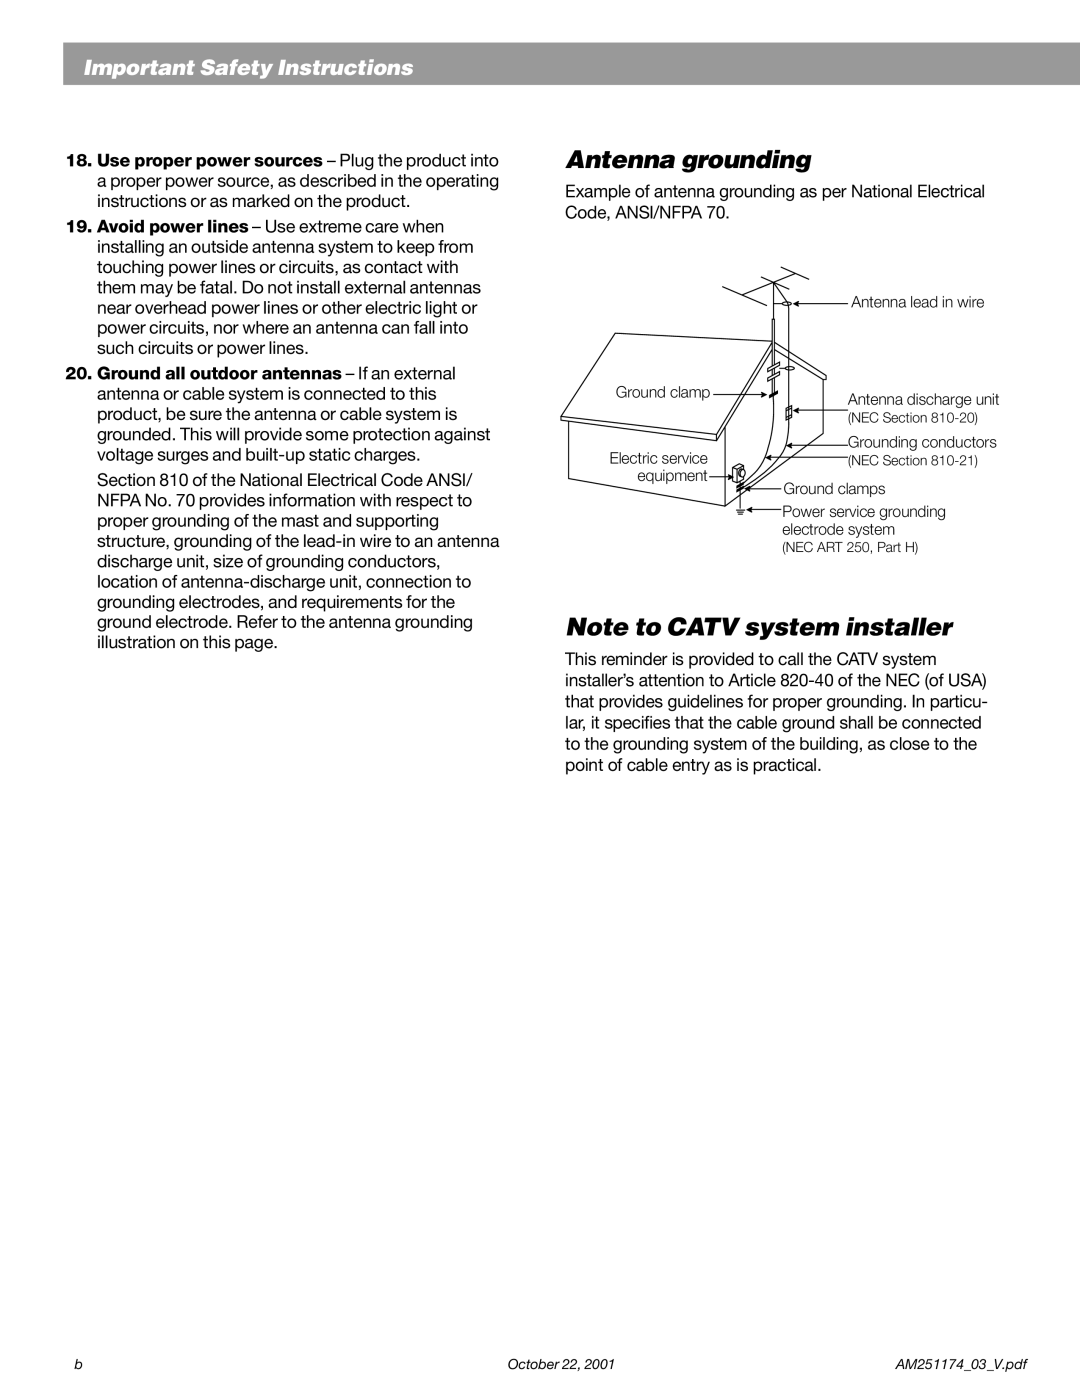 Bose Acoustimass Antenna grounding, Note to CATV system installer, Important Safety Instructions, Antenna lead in wire 